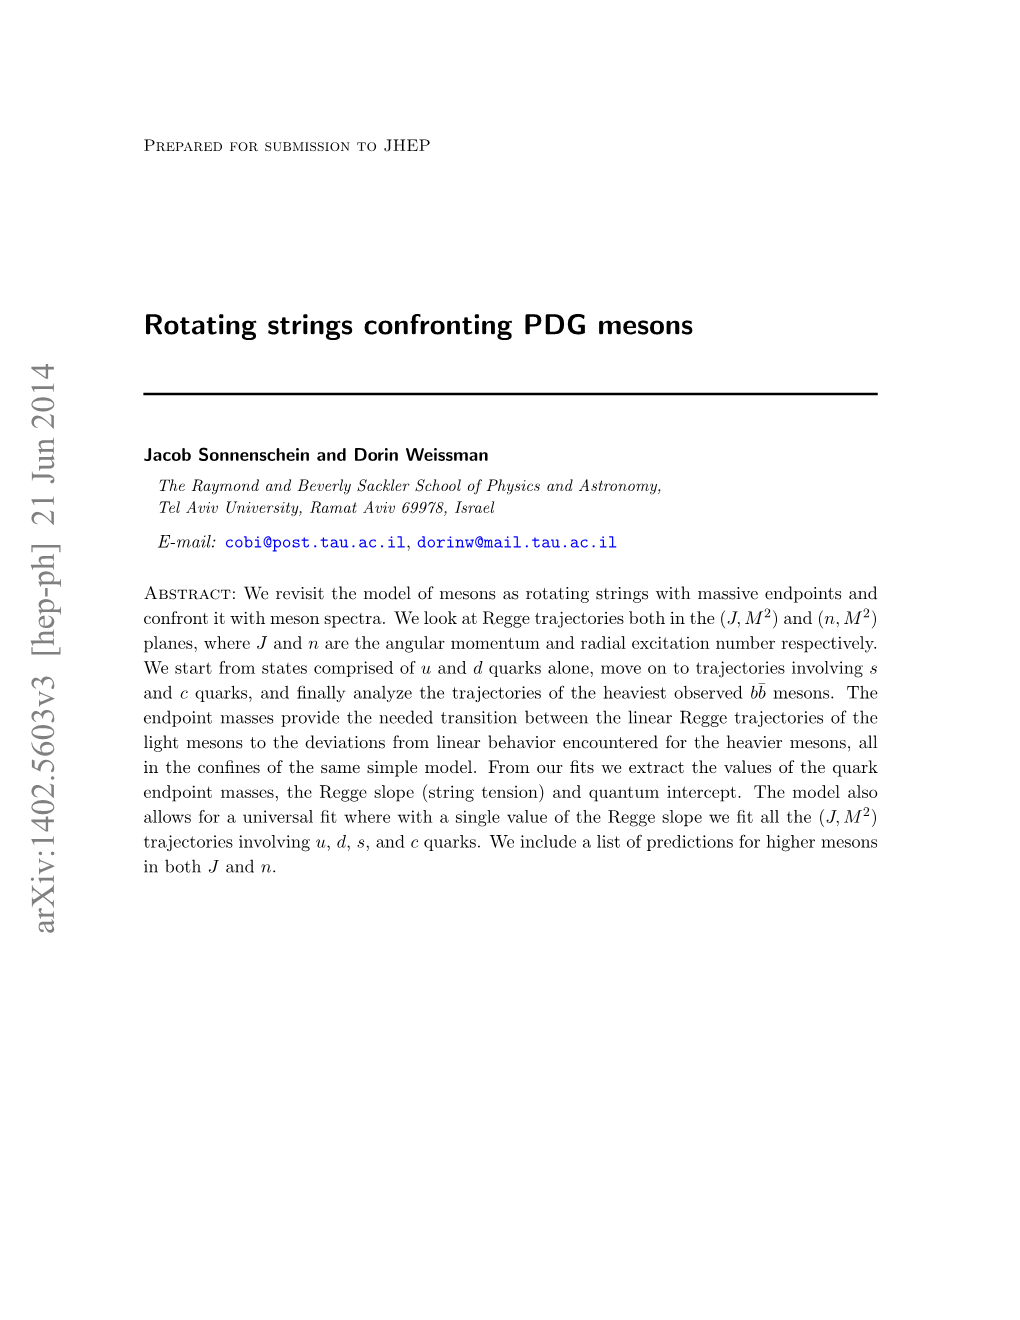 Rotating Strings Confronting PDG Mesons